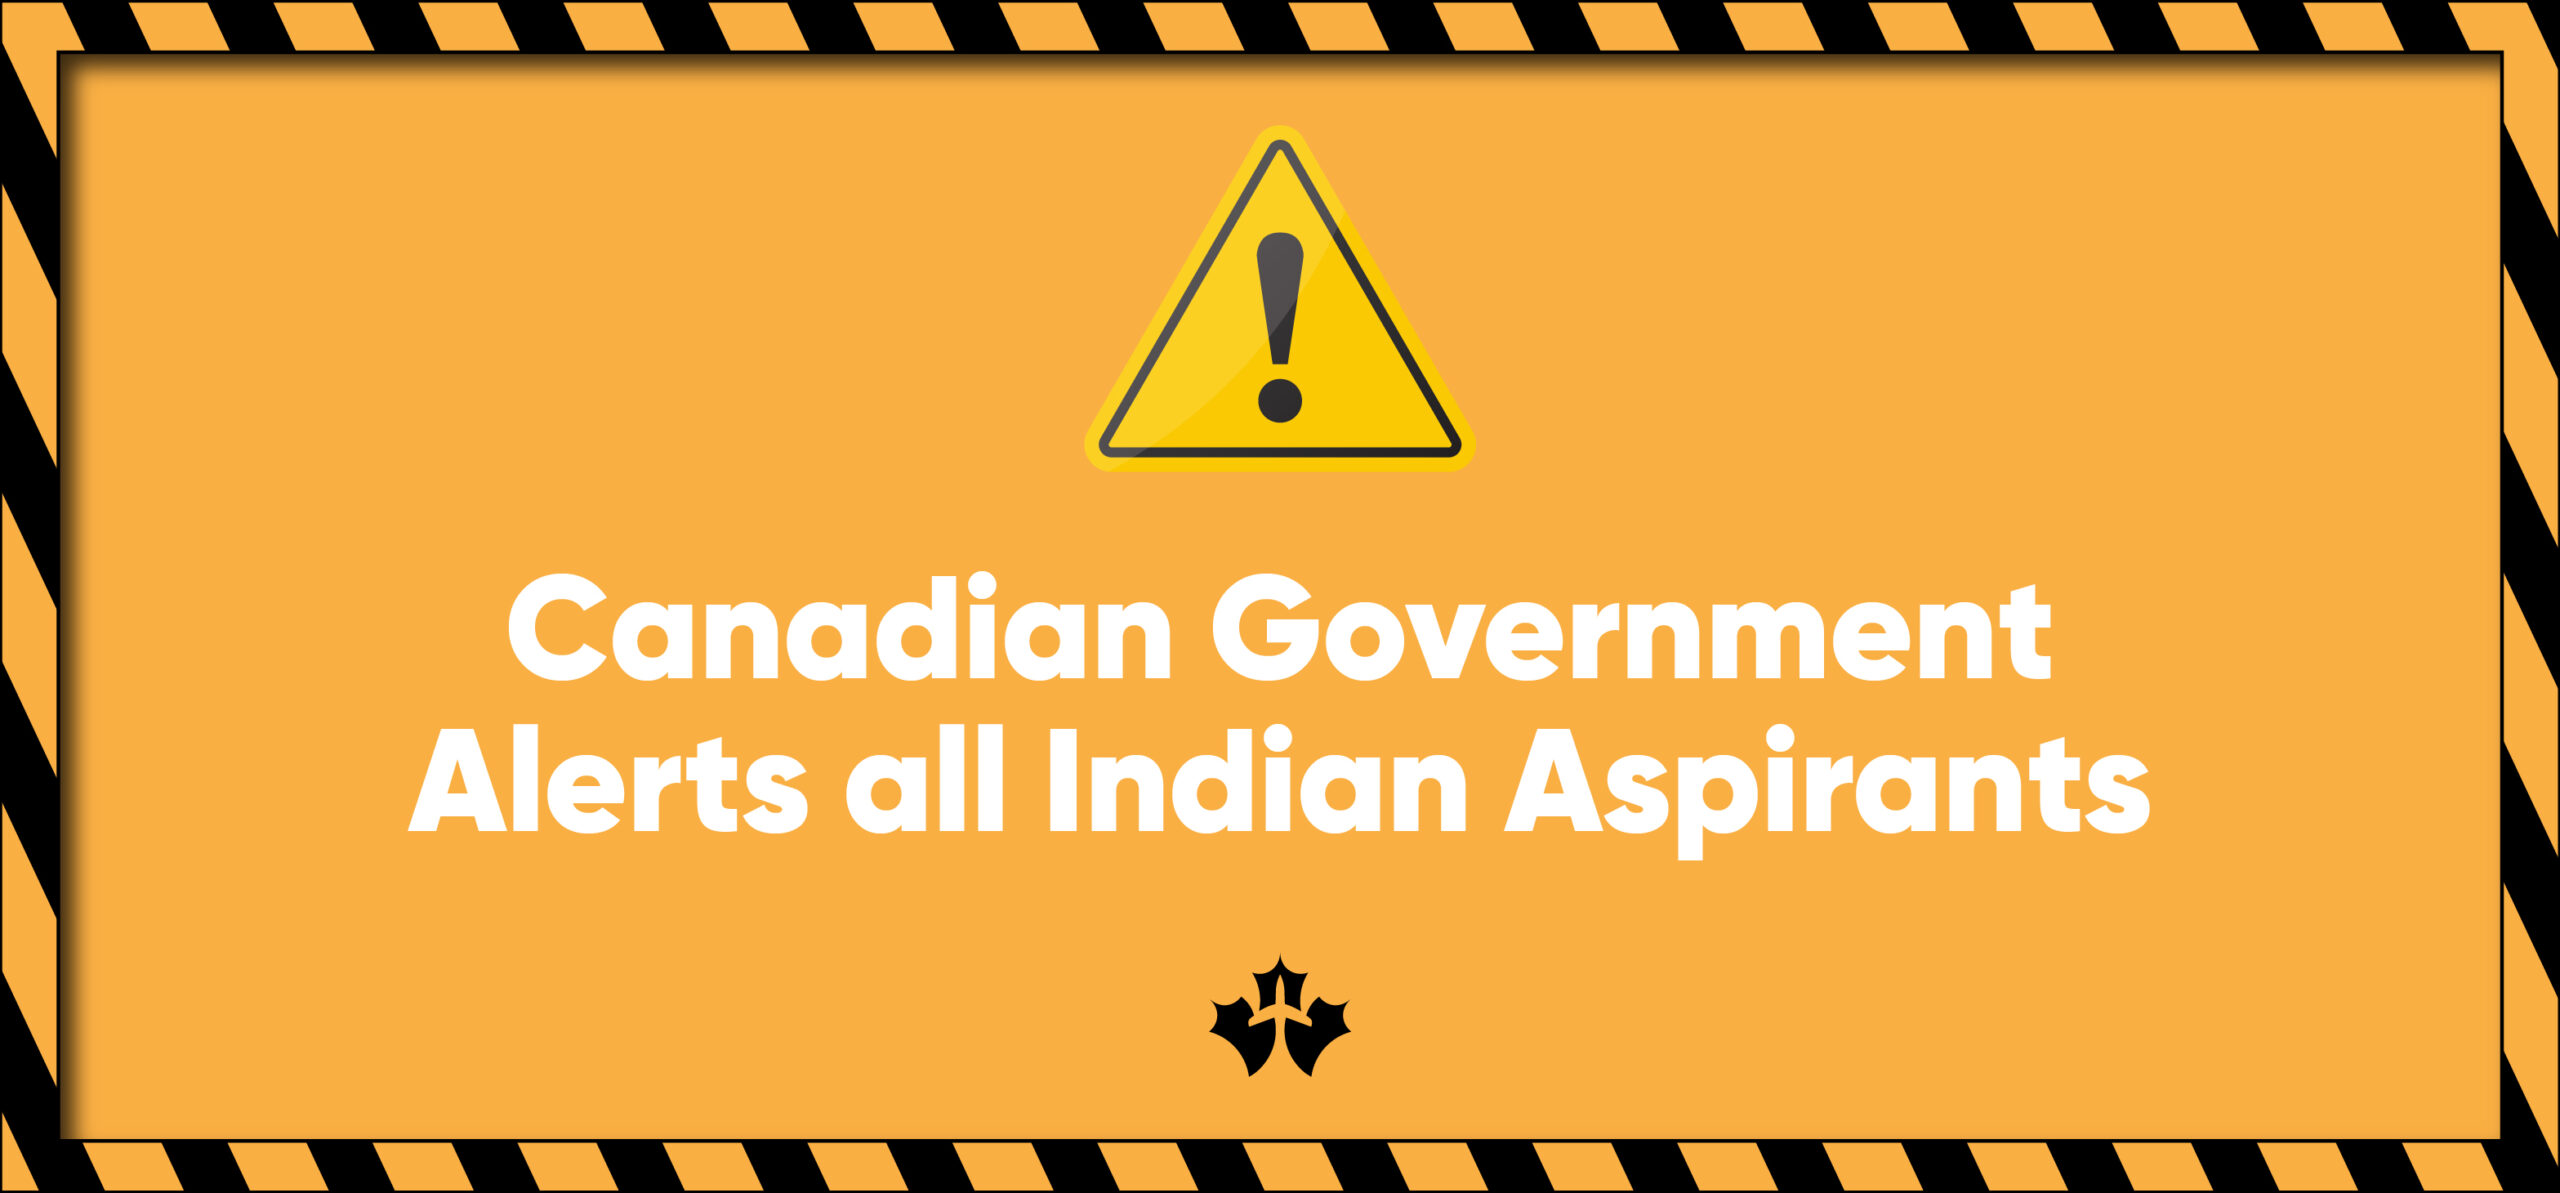 Canadian government alerts all Indian aspirants